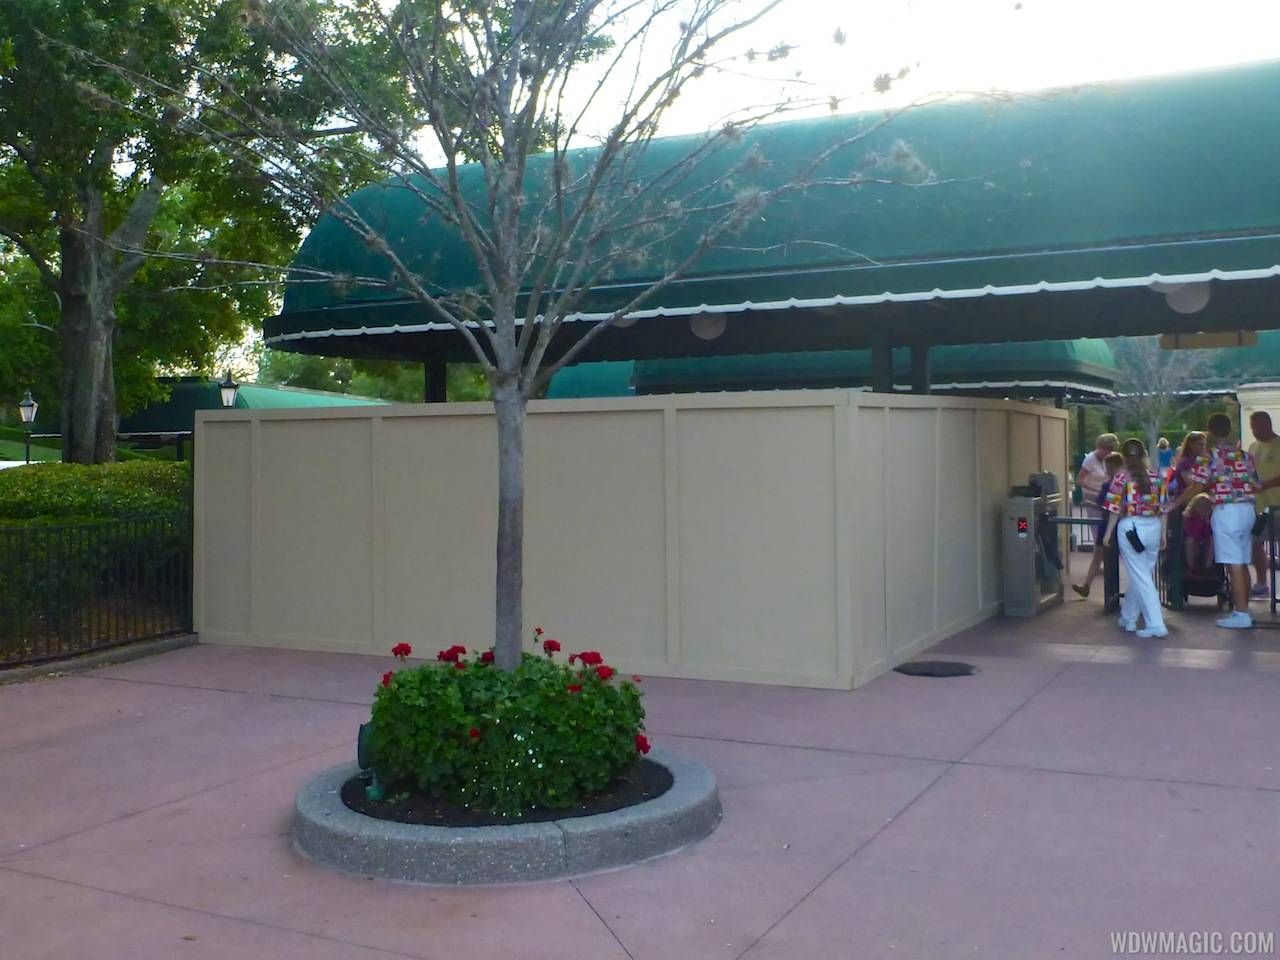 PHOTOS - MyMagic+ 'Touch to Enter' RFID turnstiles now being installed at Epcot's International Gateway